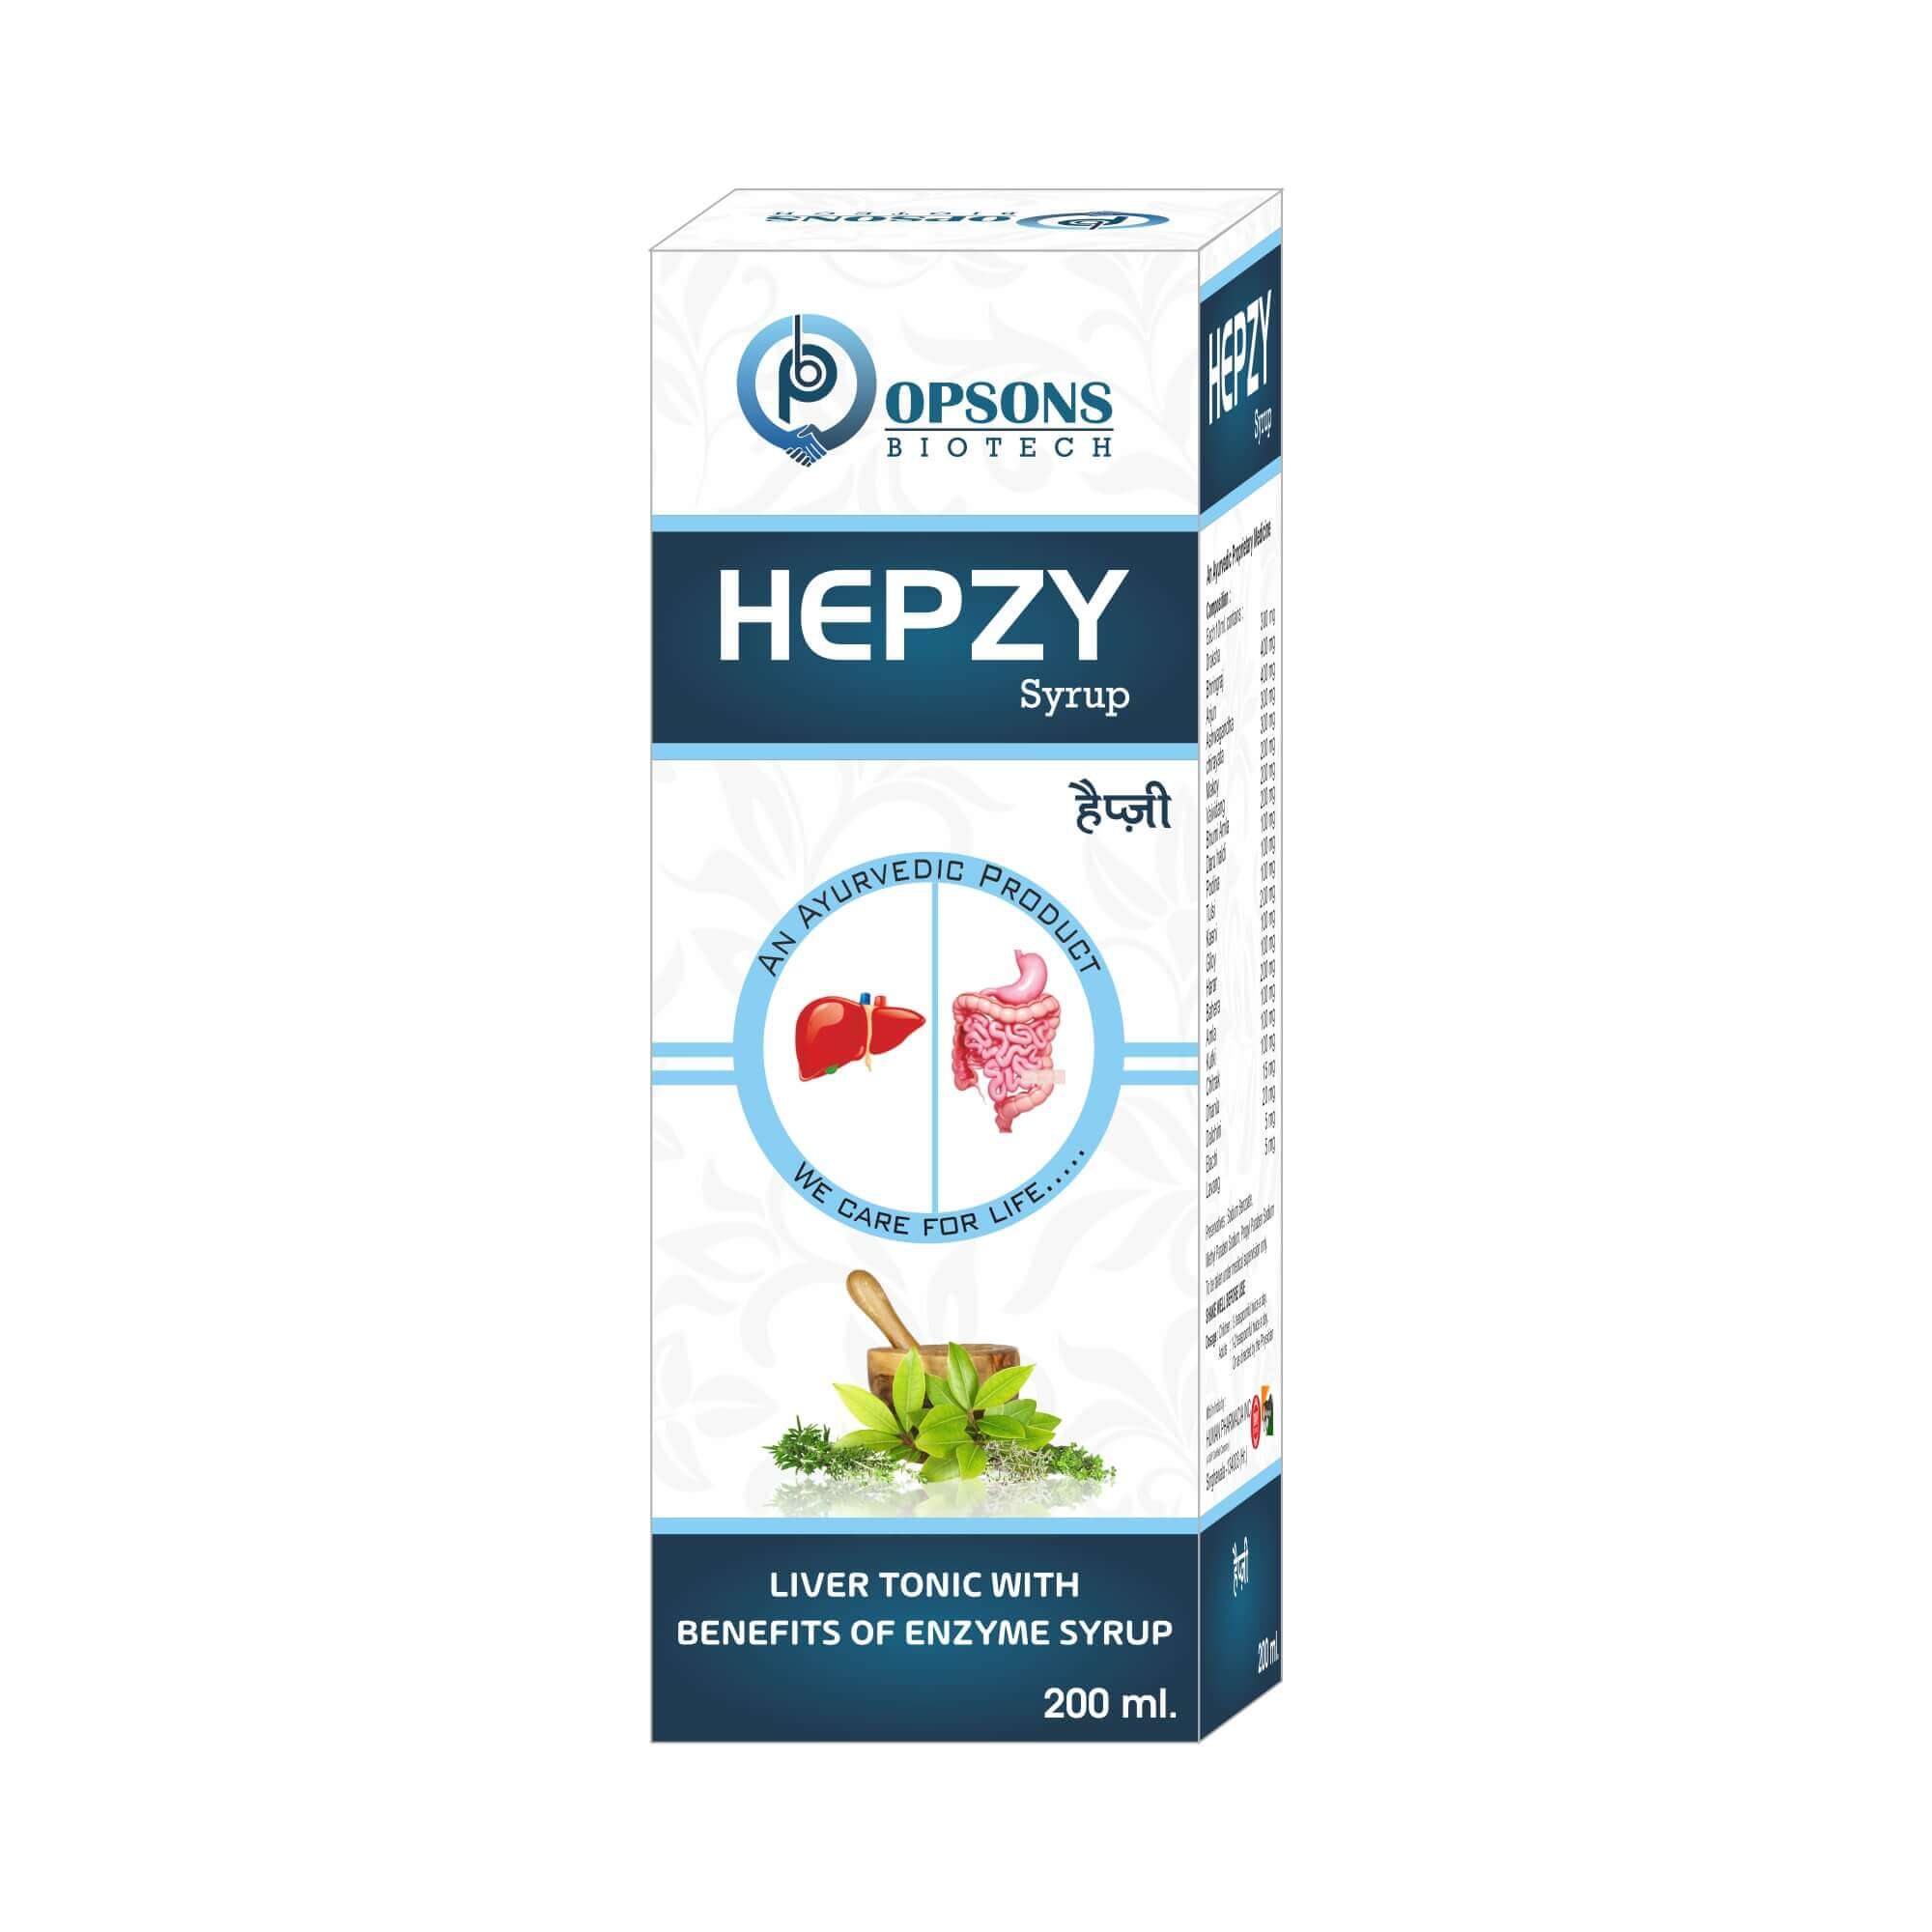 Product Name: Hepzy, Compositions of Liver Tonic with Benefits of Enzyme Syrup are Liver Tonic with Benefits of Enzyme Syrup - Opsons Biotech